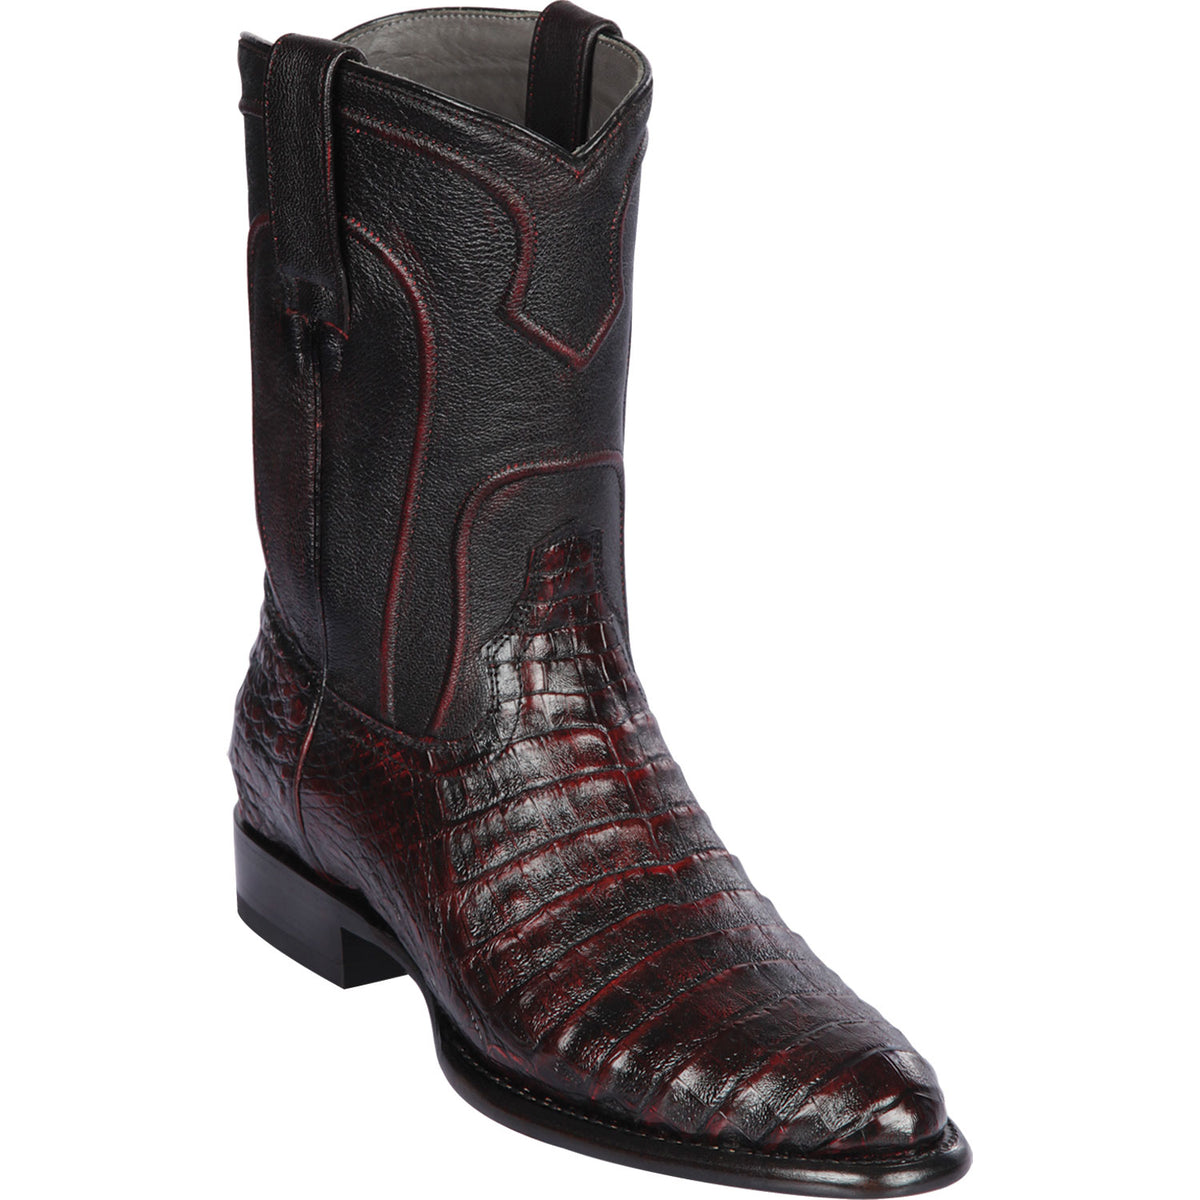 Caiman Belly Skin Boot LAB-6982